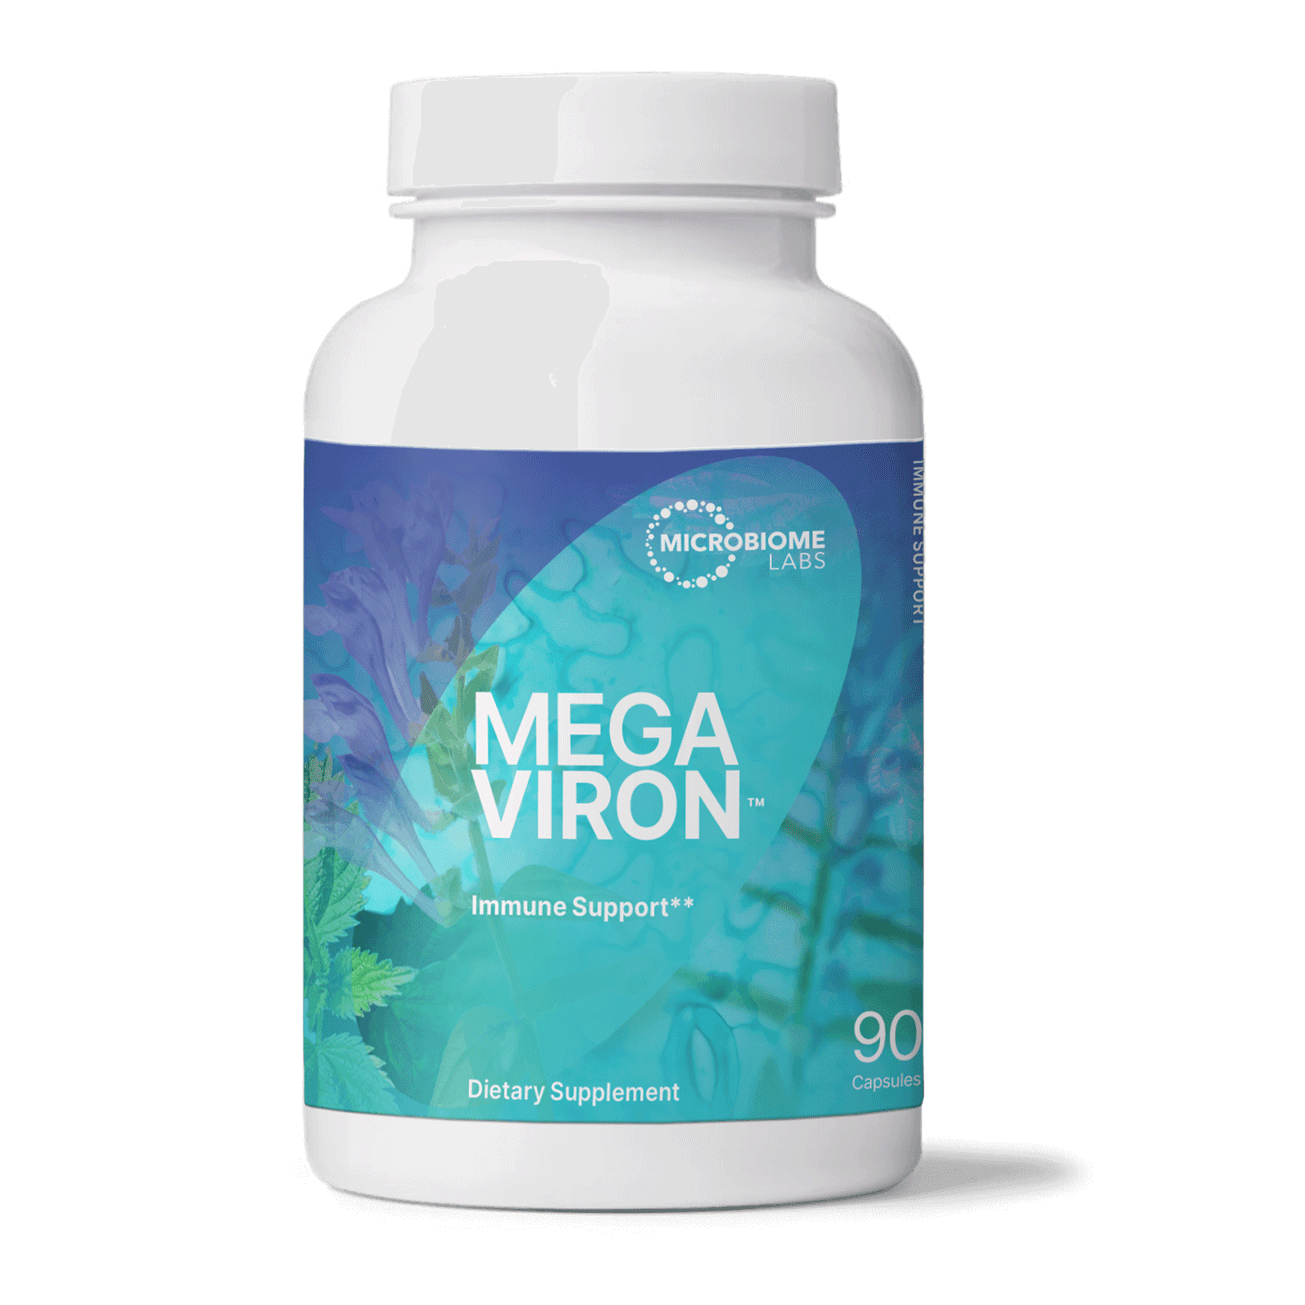 MegaViron by Microbiome Labs New Bottle